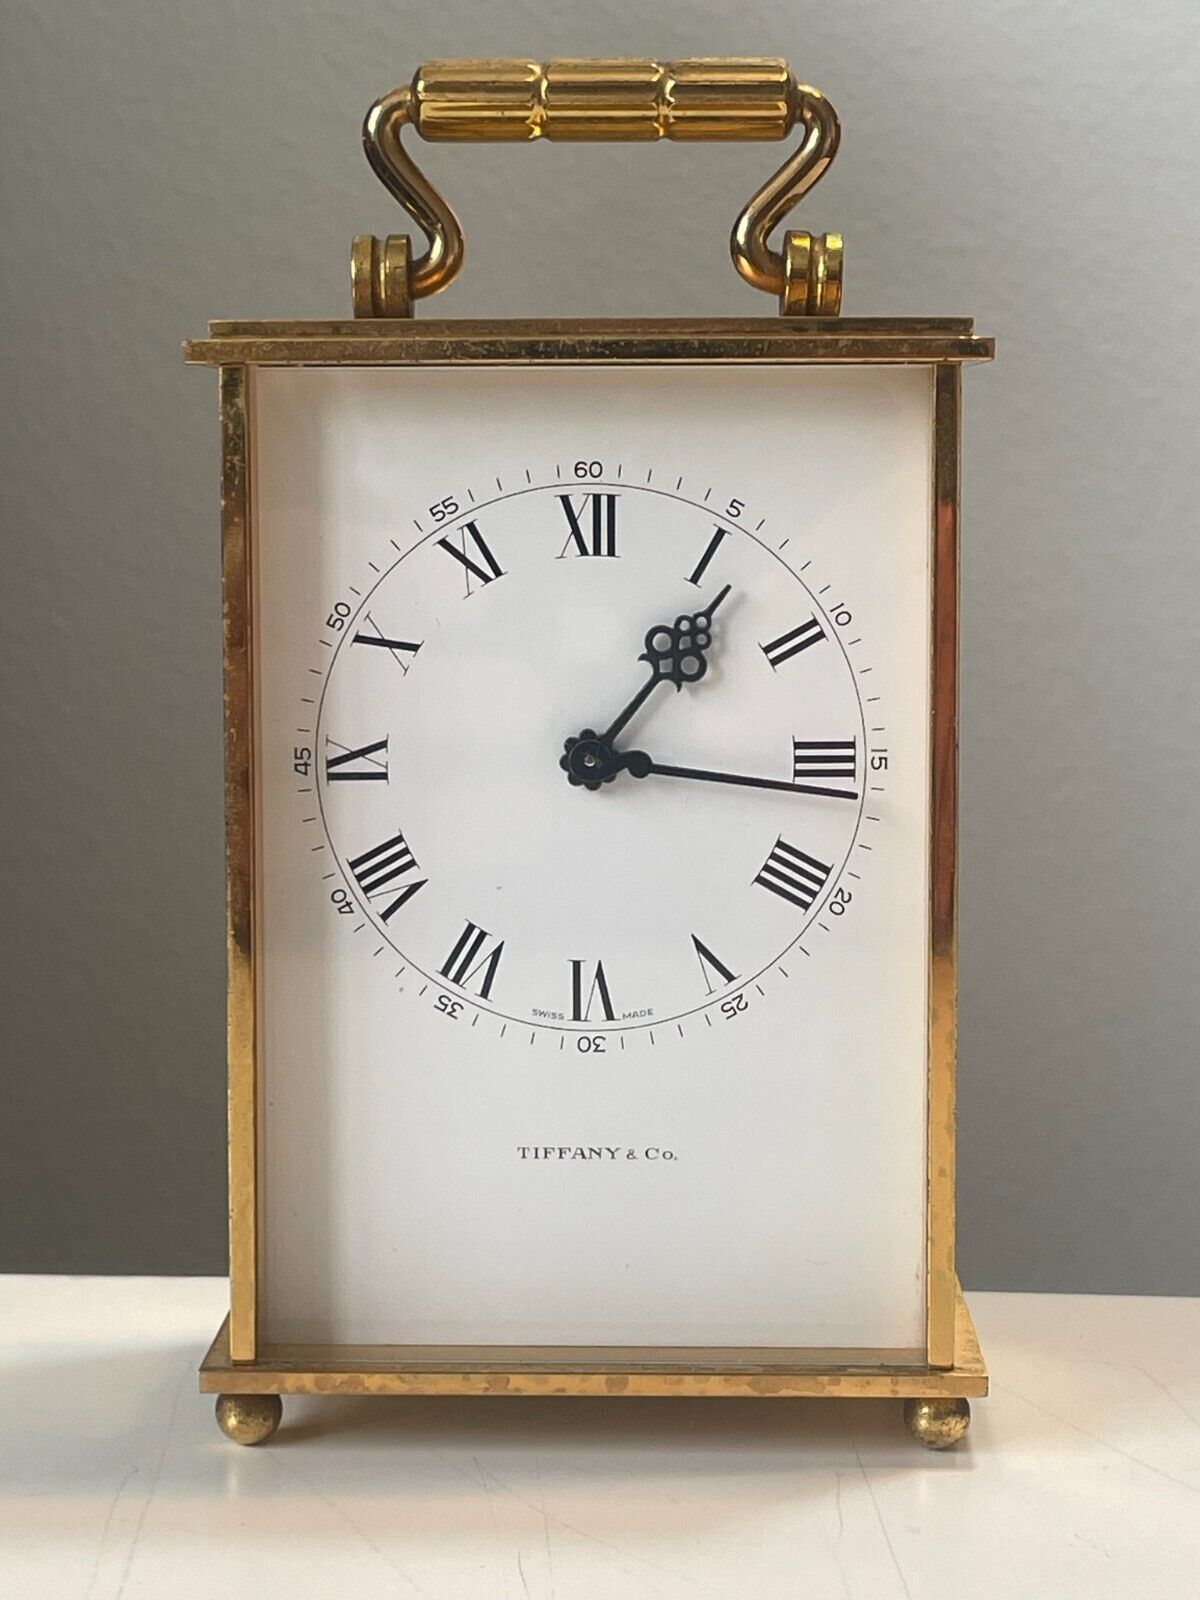 Exquisite Tiffany Carriage Clock - Expertly Serviced, Runs Flawlessly